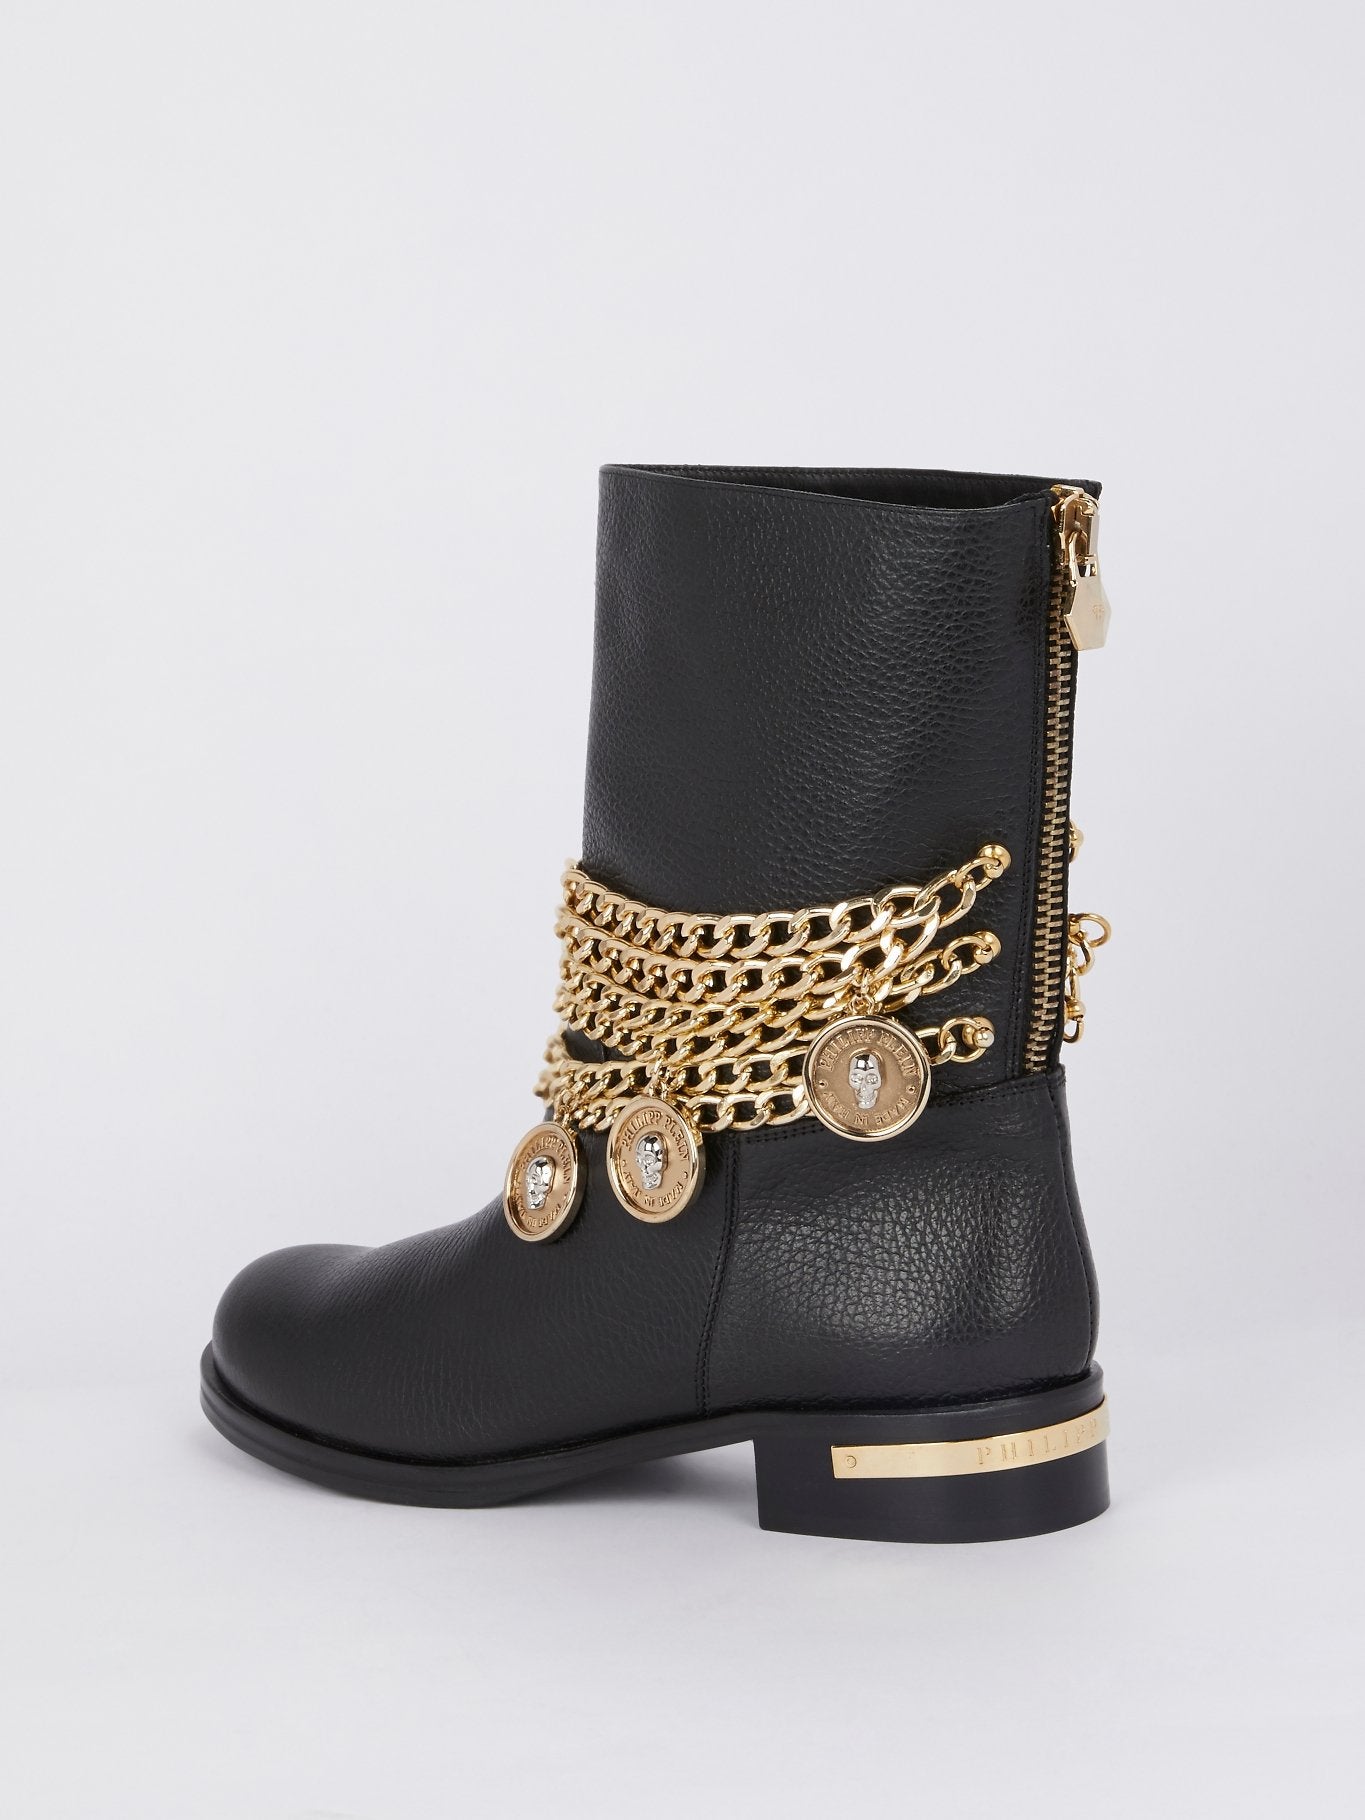 black and gold leather boots